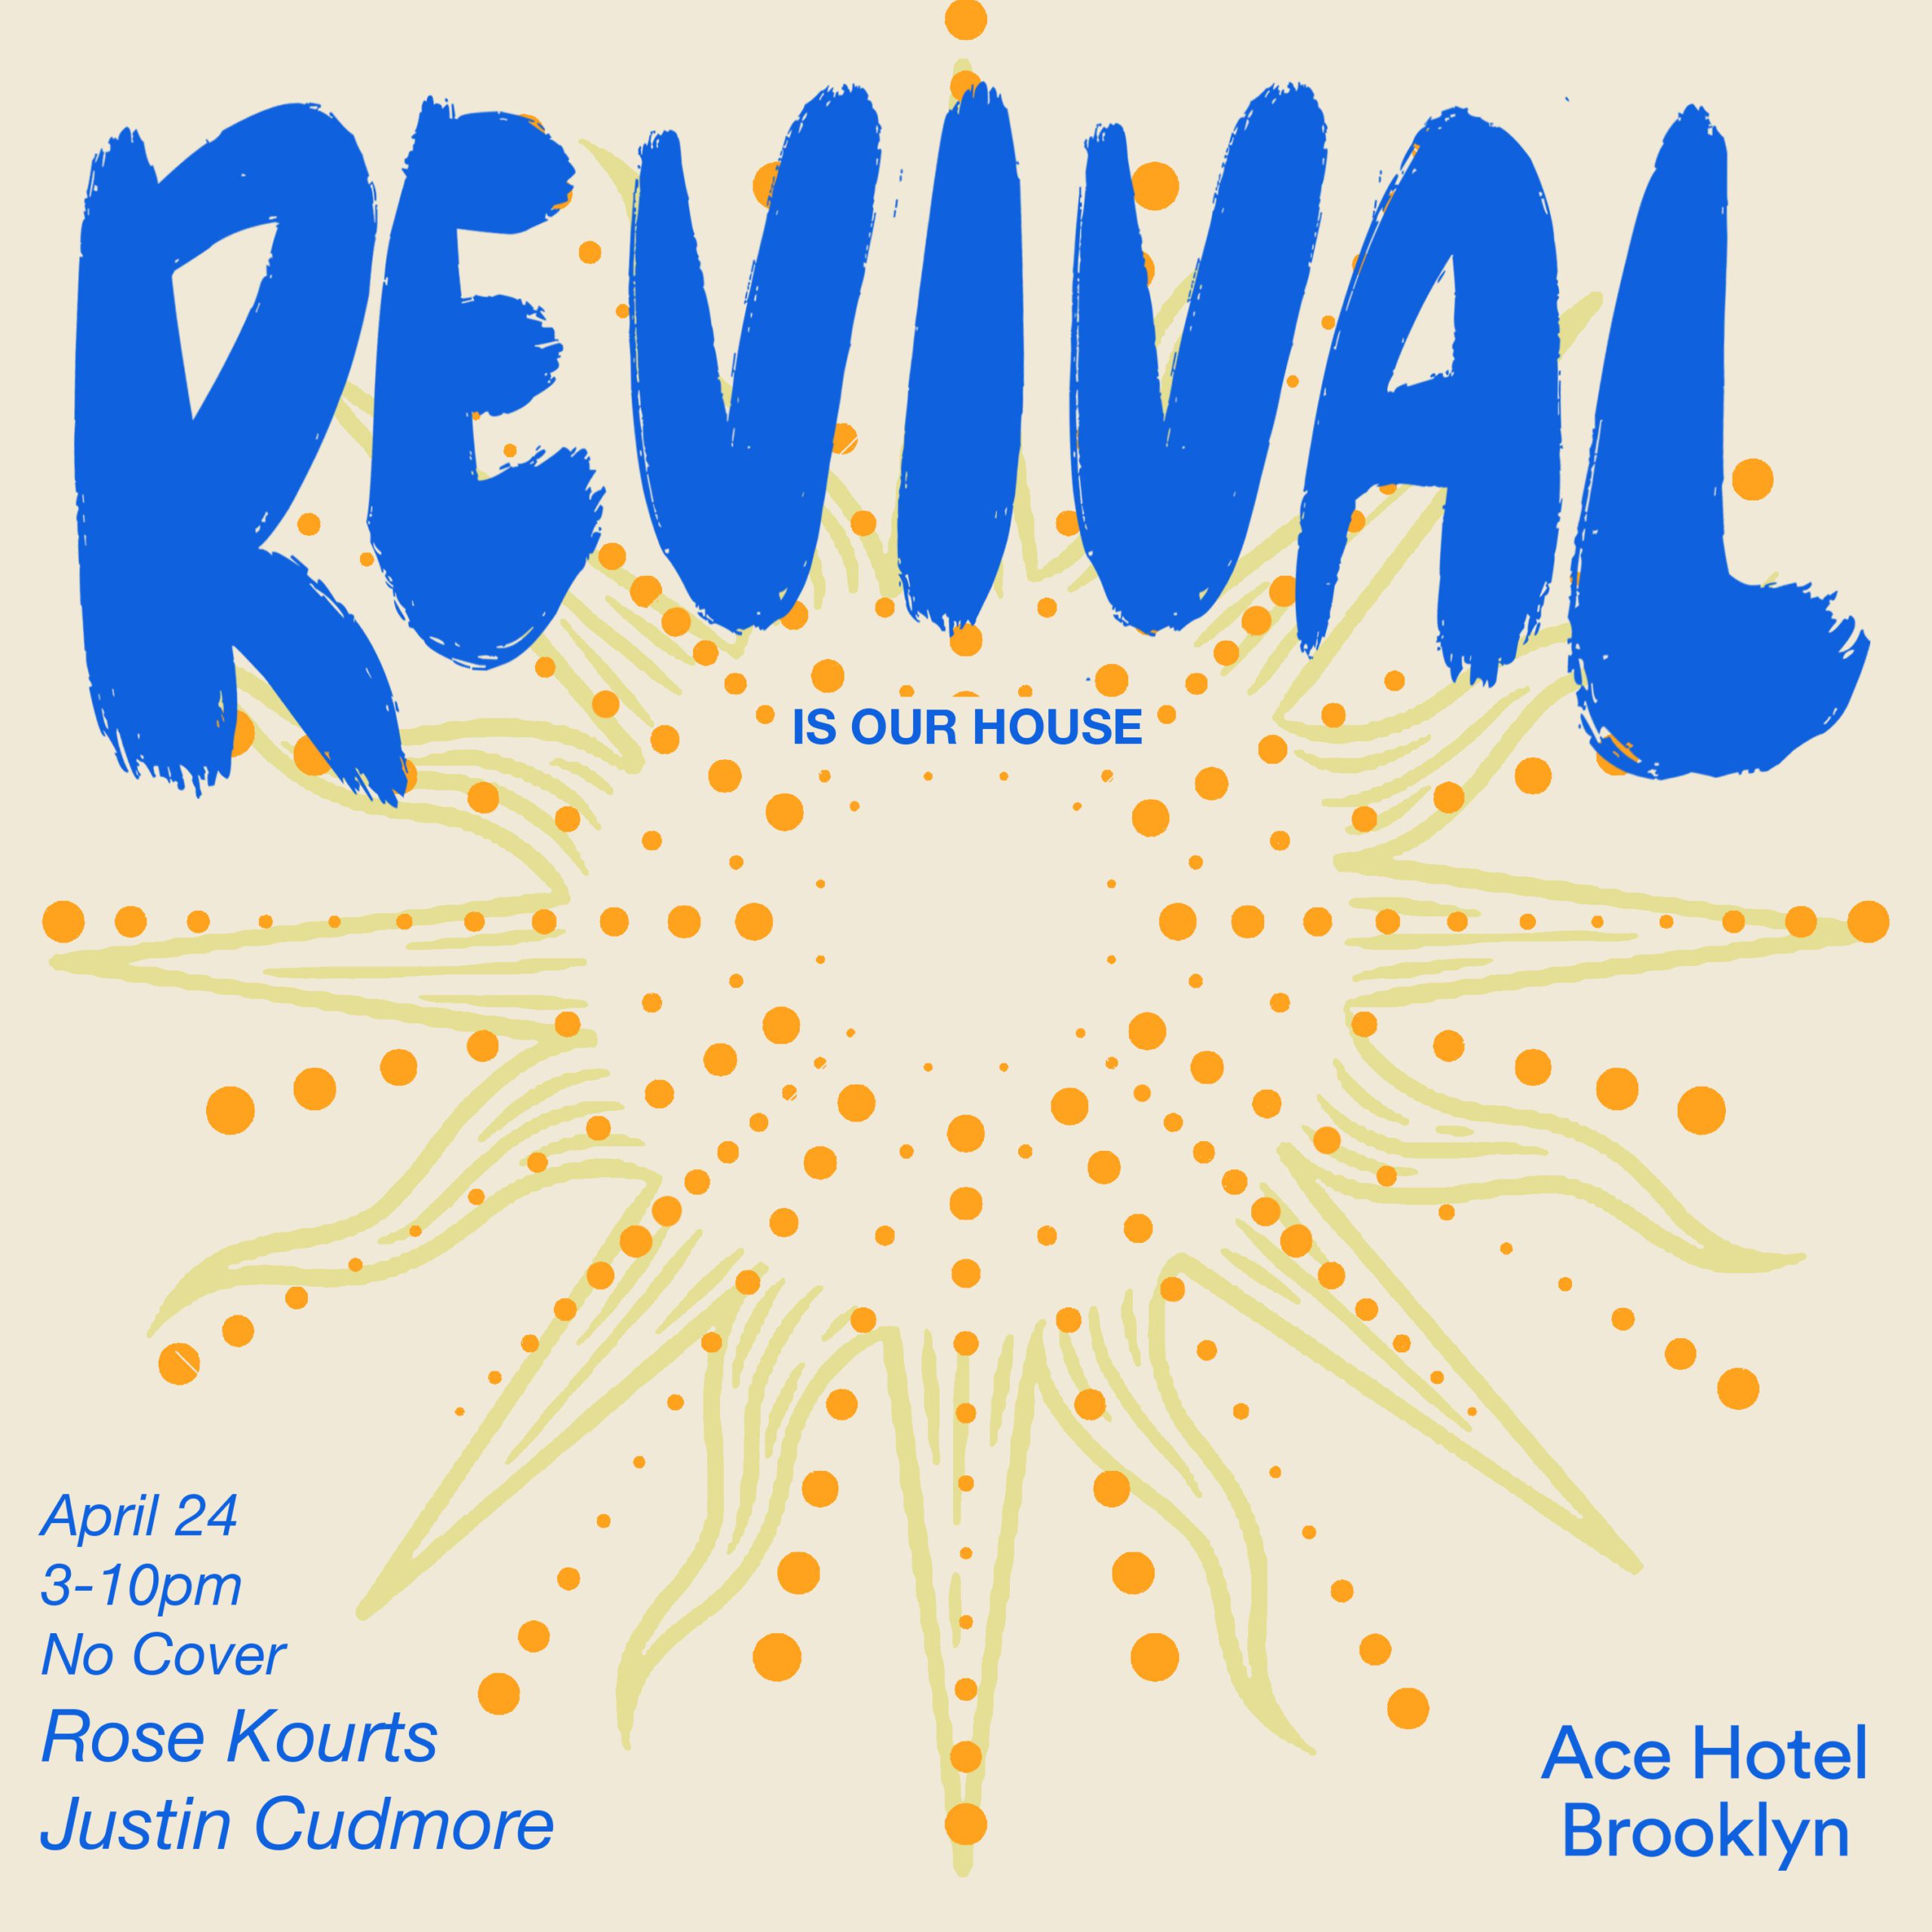 Revival is Our House event flyer